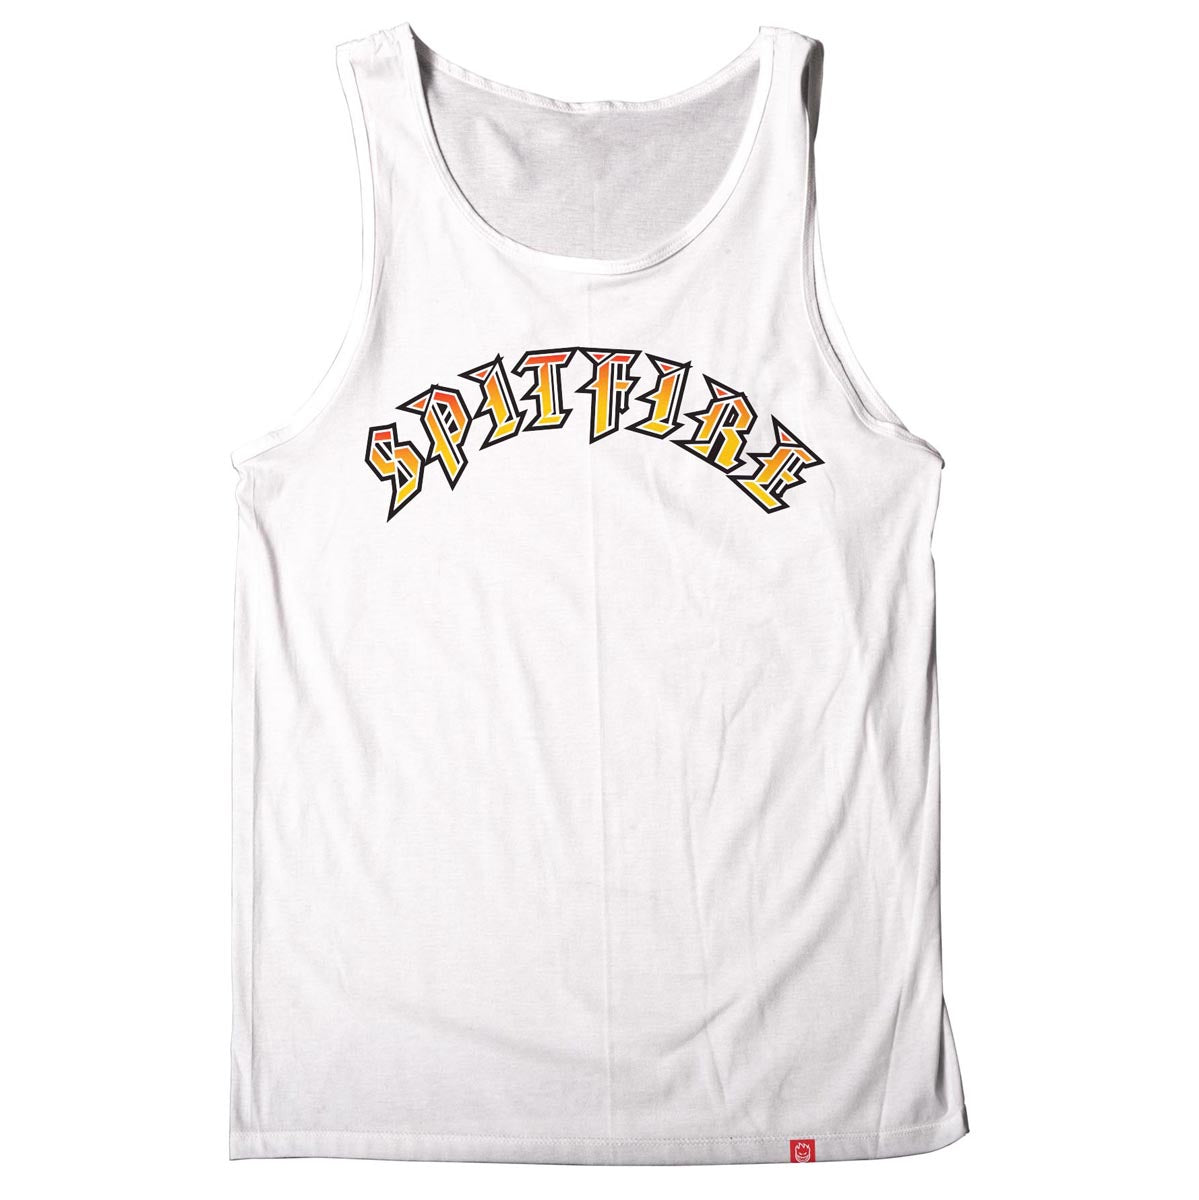 Spitfire Old E Fade Fill Tank Top - White/Red Gold Fade image 1